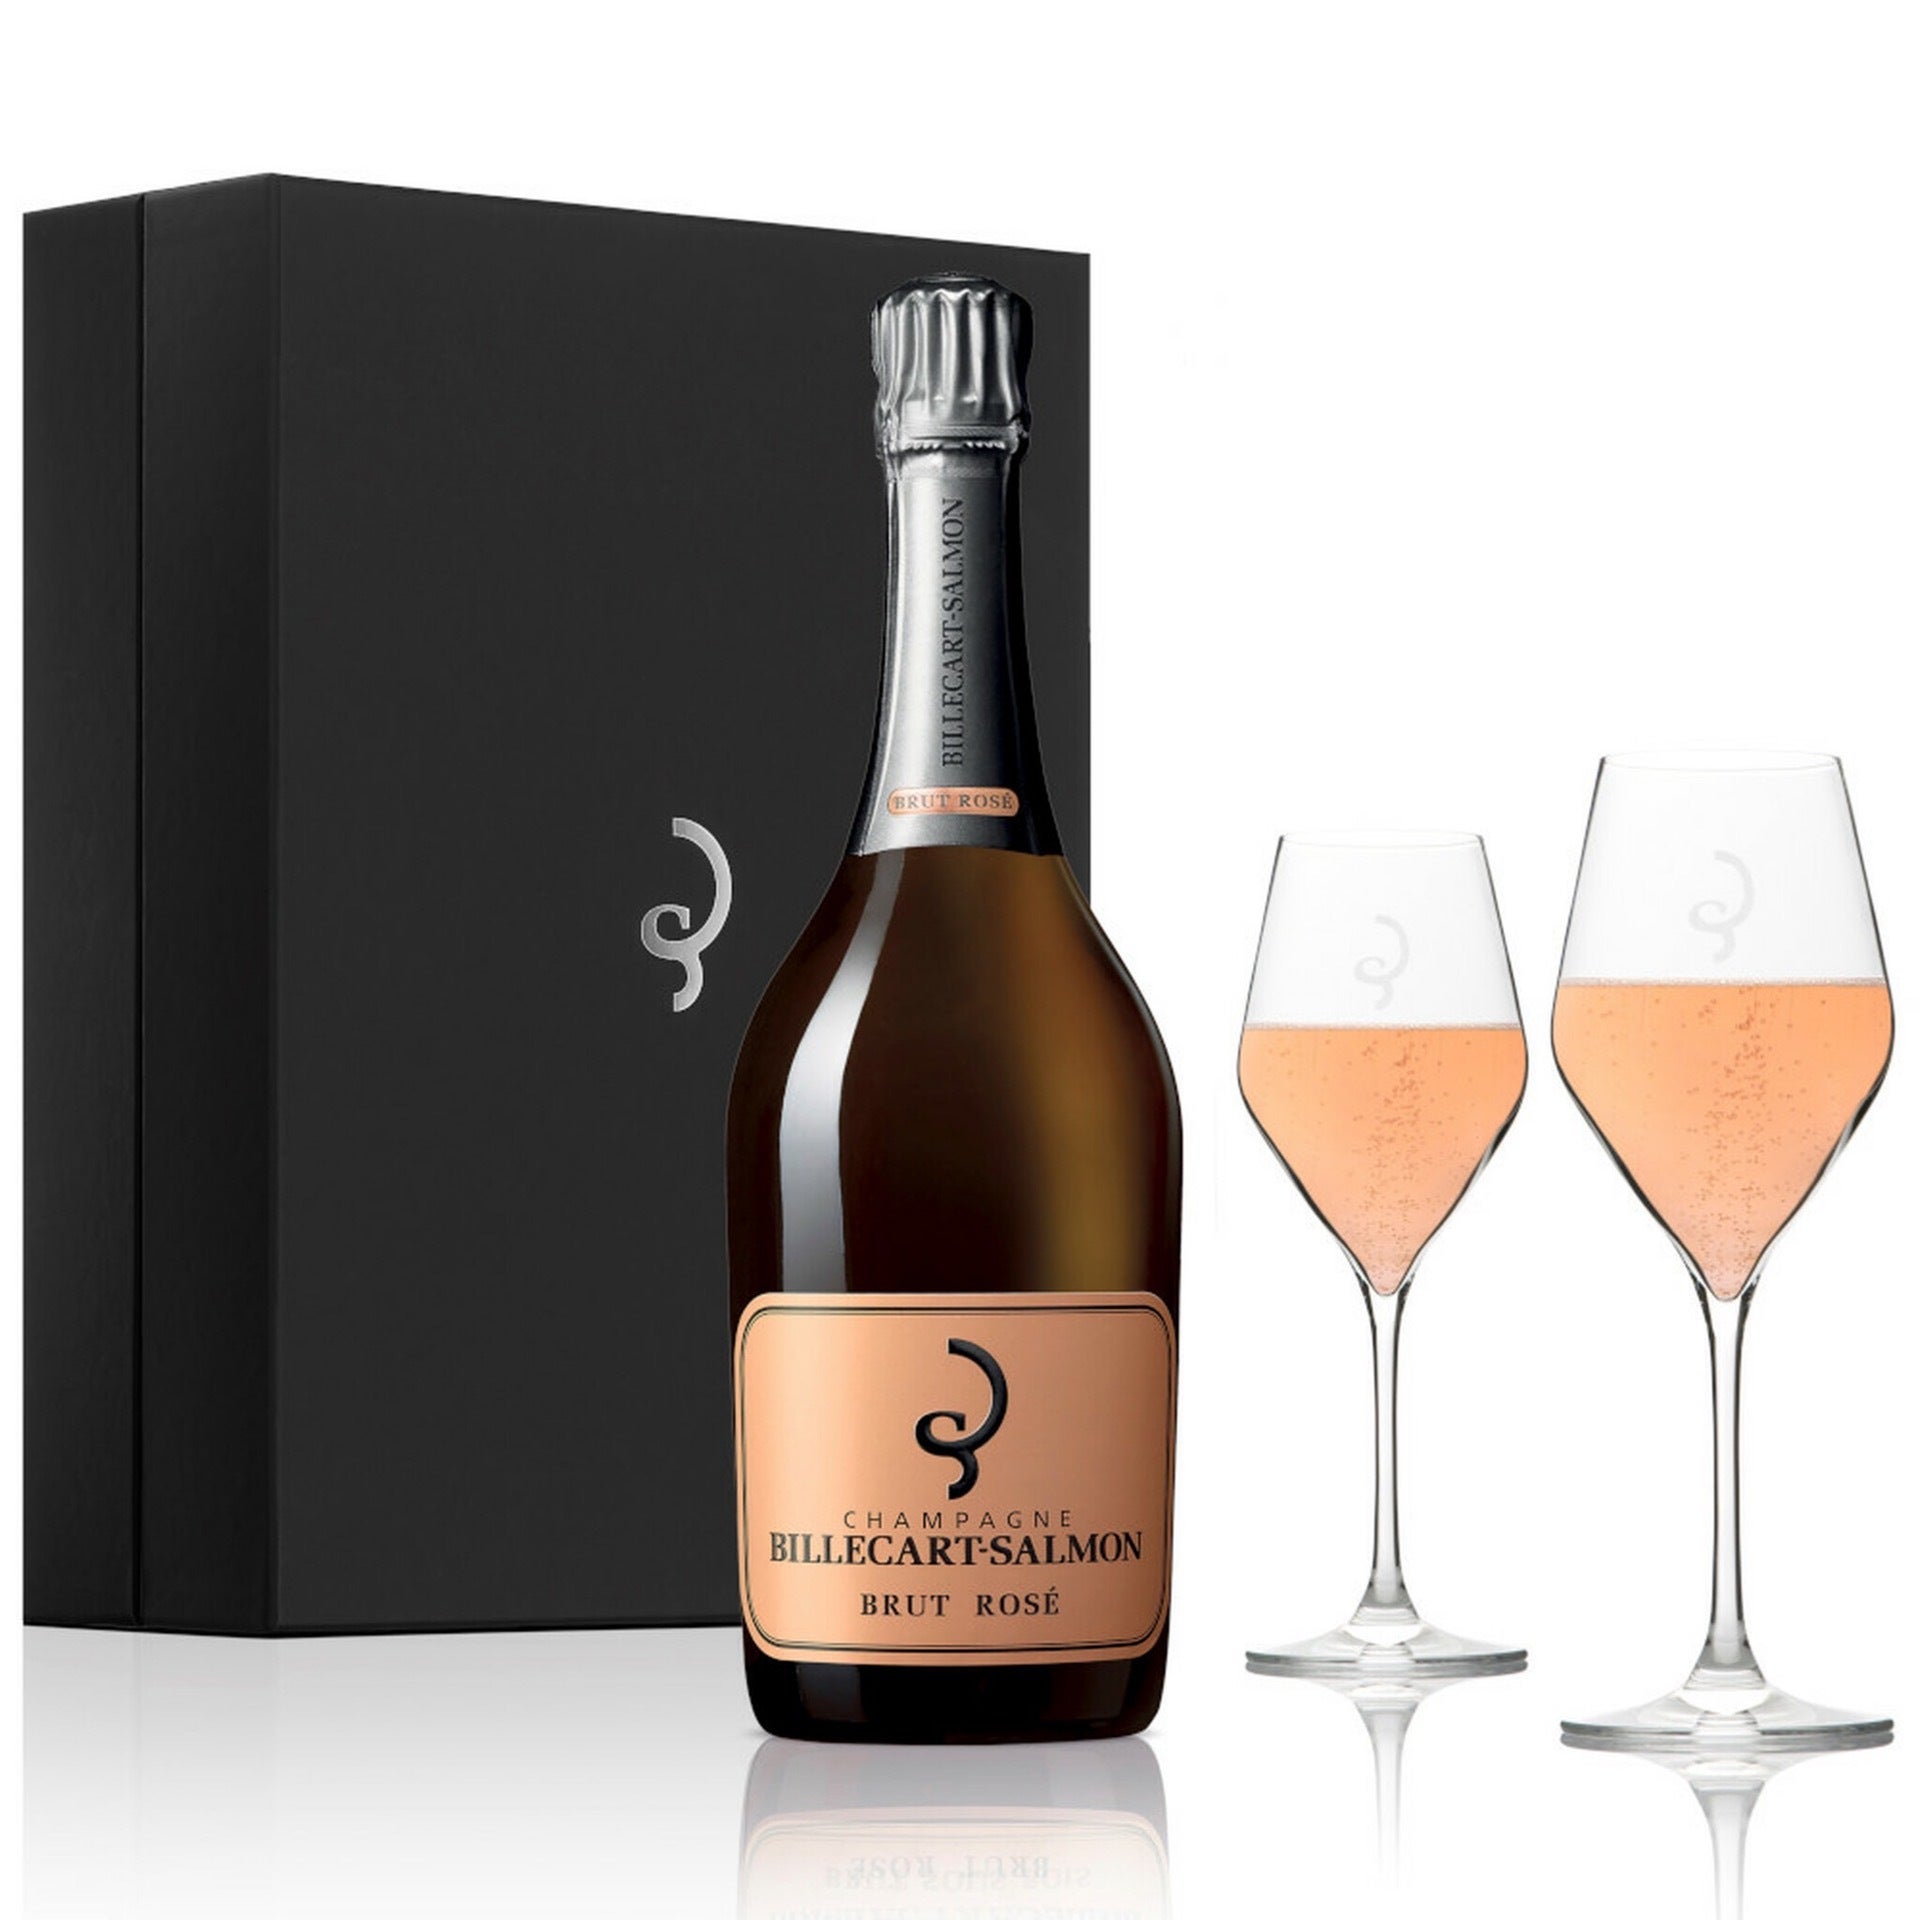 Personalised Riondo Prosecco gift set with glasses | YourSurprise